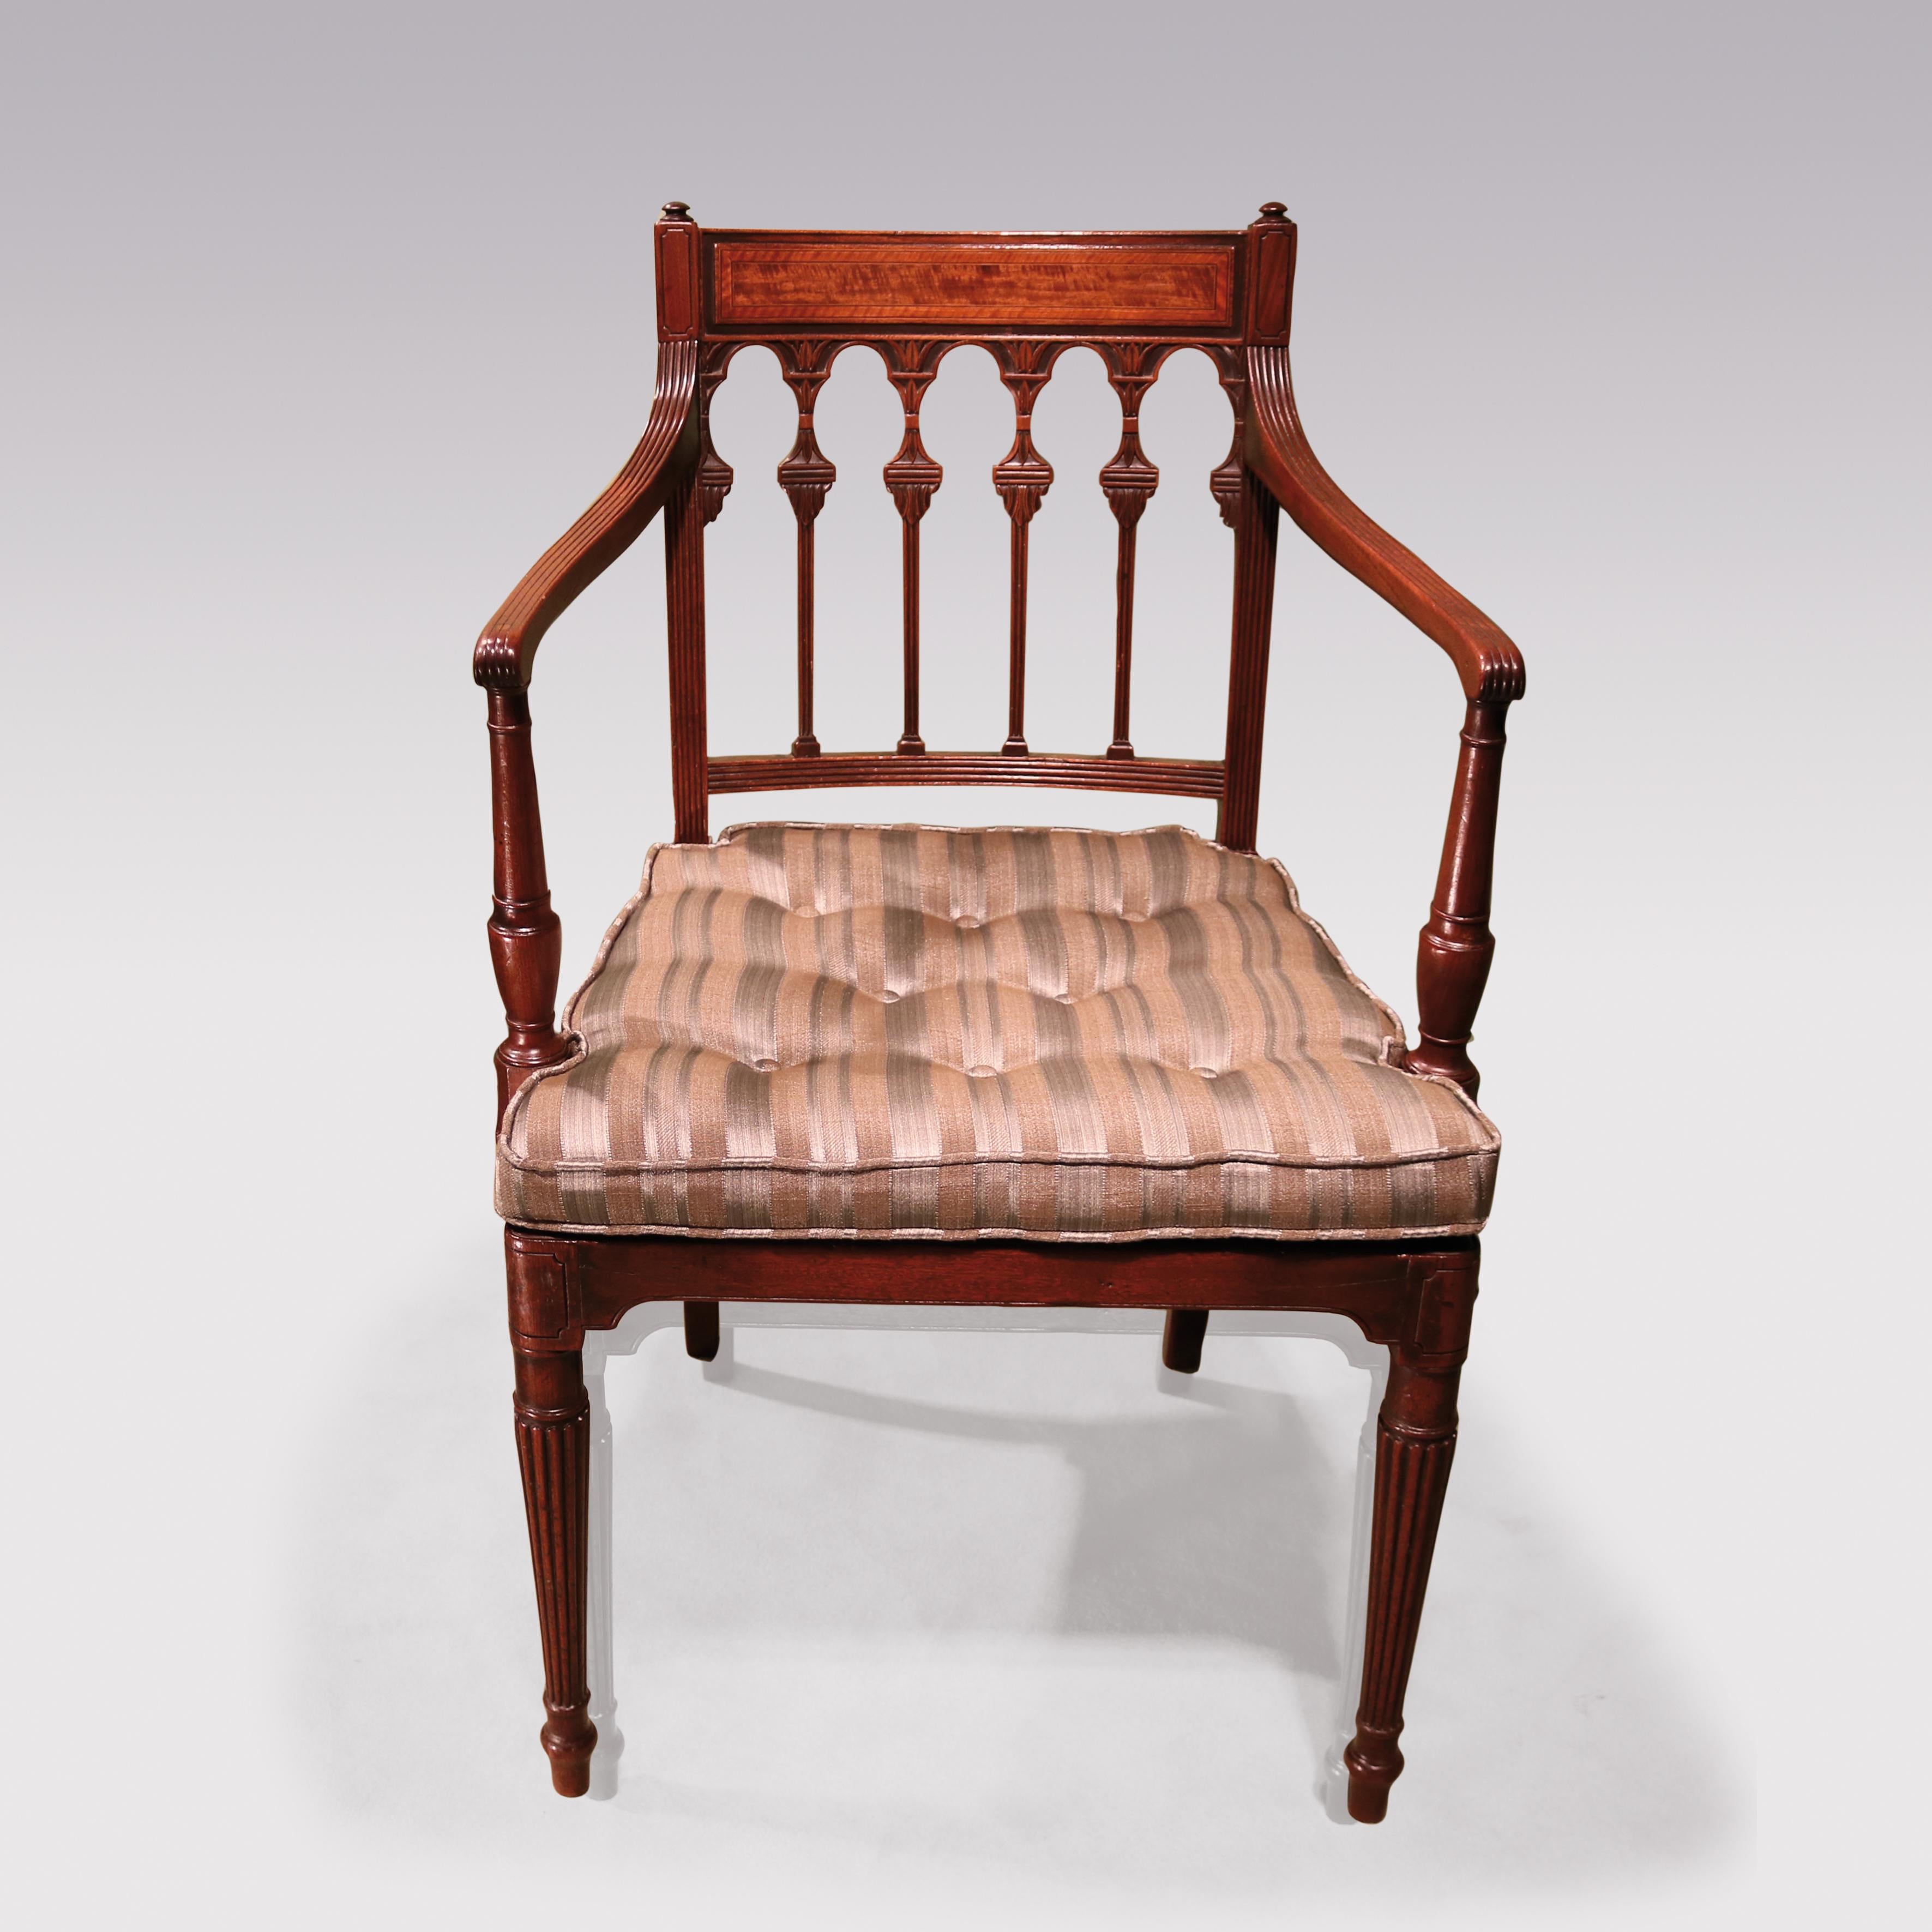 An attractive George III period mahogany Armchair, having boxwood & ebony satinwood panelled back above arched leaf-carved splats. The Chair with vase turned arm supports having caned seat and squab cushion raised on reeded tapering legs.